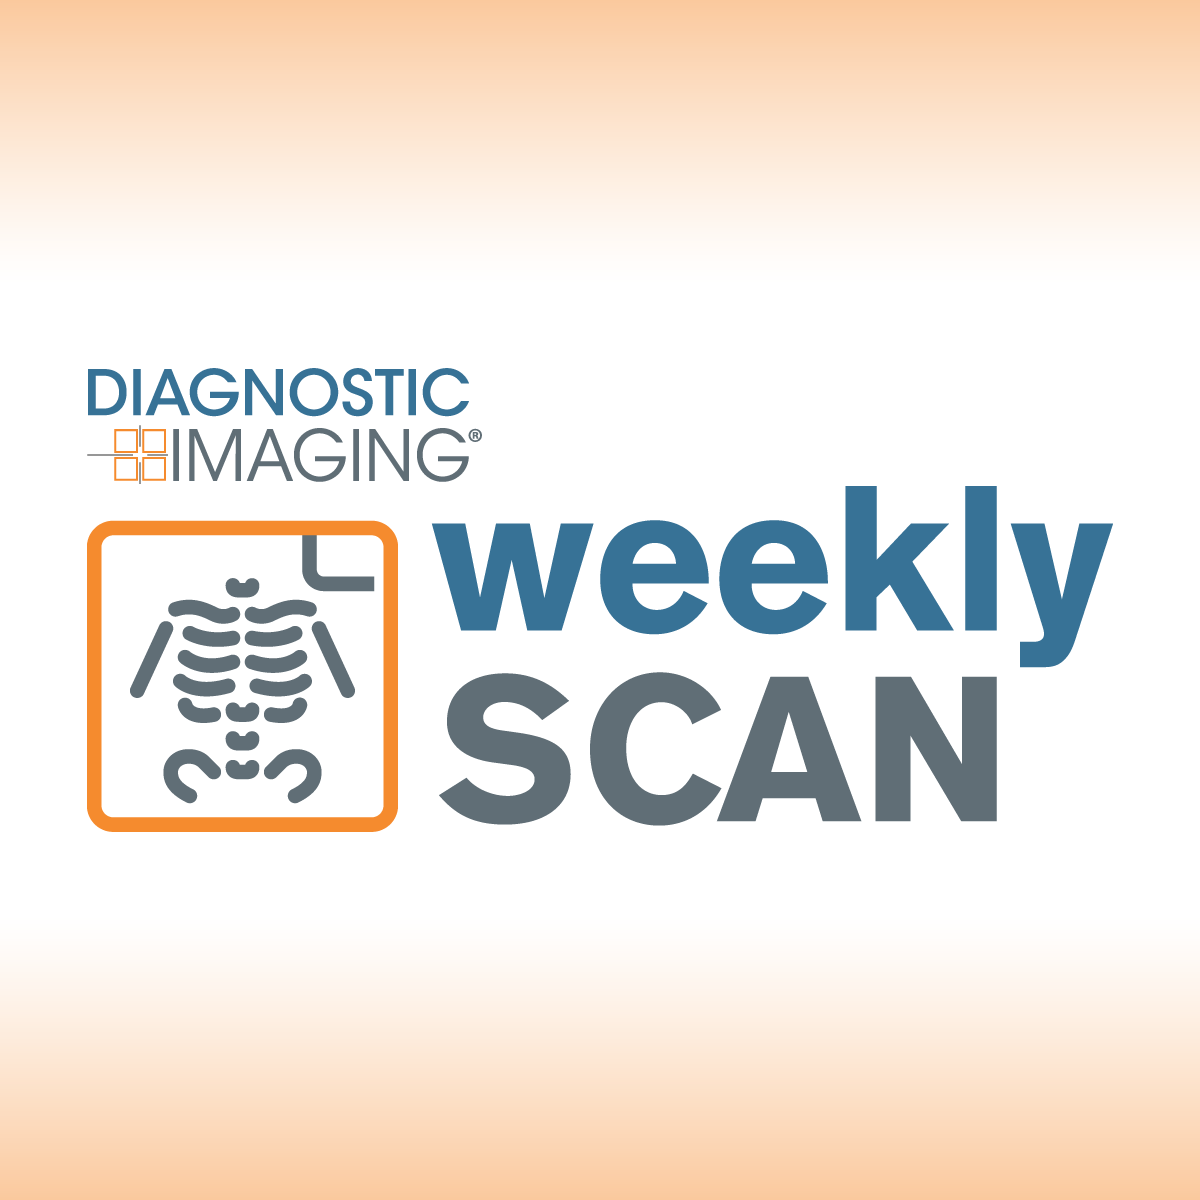 Diagnostic Imaging's Weekly Scan: August 13-August 19